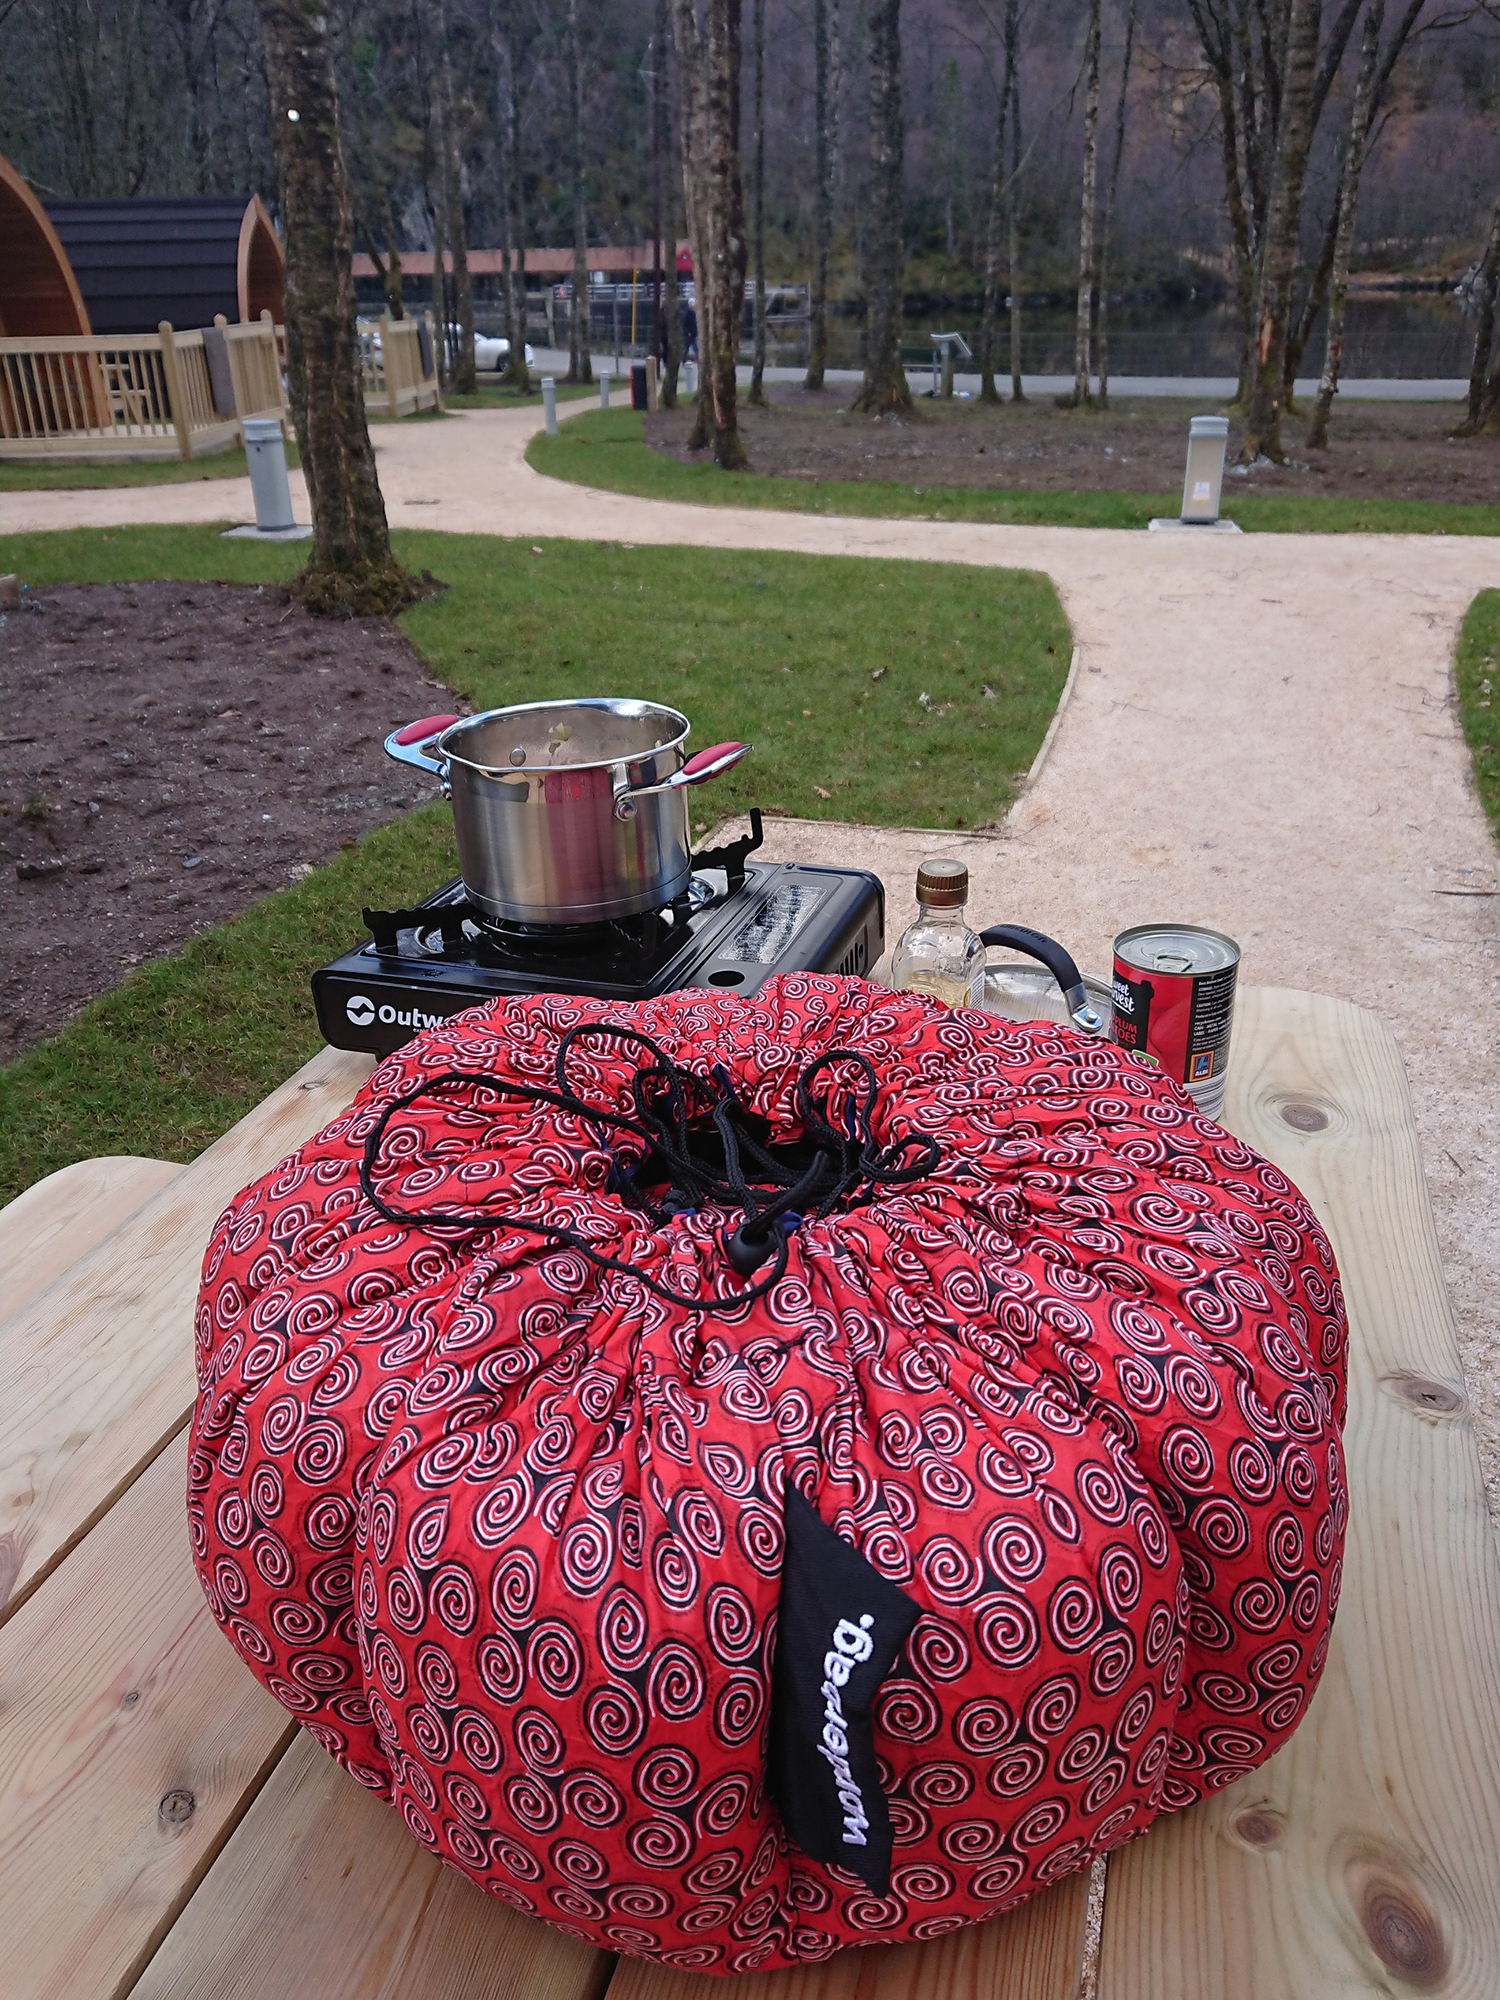 Wonderbag Review  The Best Non-Electric Slow Cooker